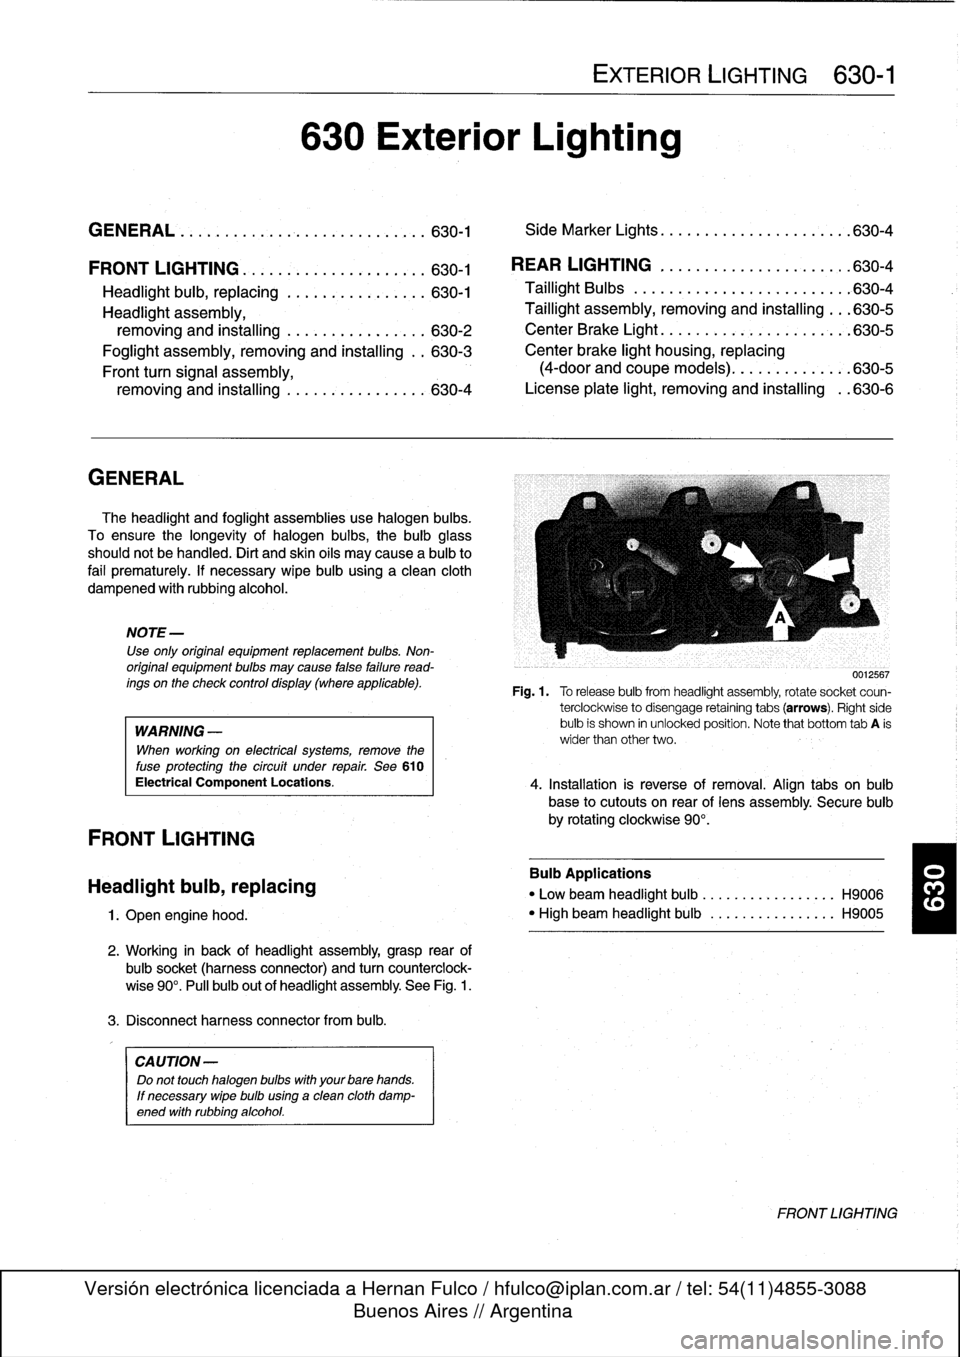 BMW 323i 1993 E36 Workshop Manual 
FRONT
LIGHTING
.
...........
.
....
.
.
.
.
630-1

Headlight
buib,
replacing
............
.
.
.
.
630-1
Headlight
assembly,

removing
and
installing
.......
.
....
.
.
.
.
630-2

Foglight
assembly,
r